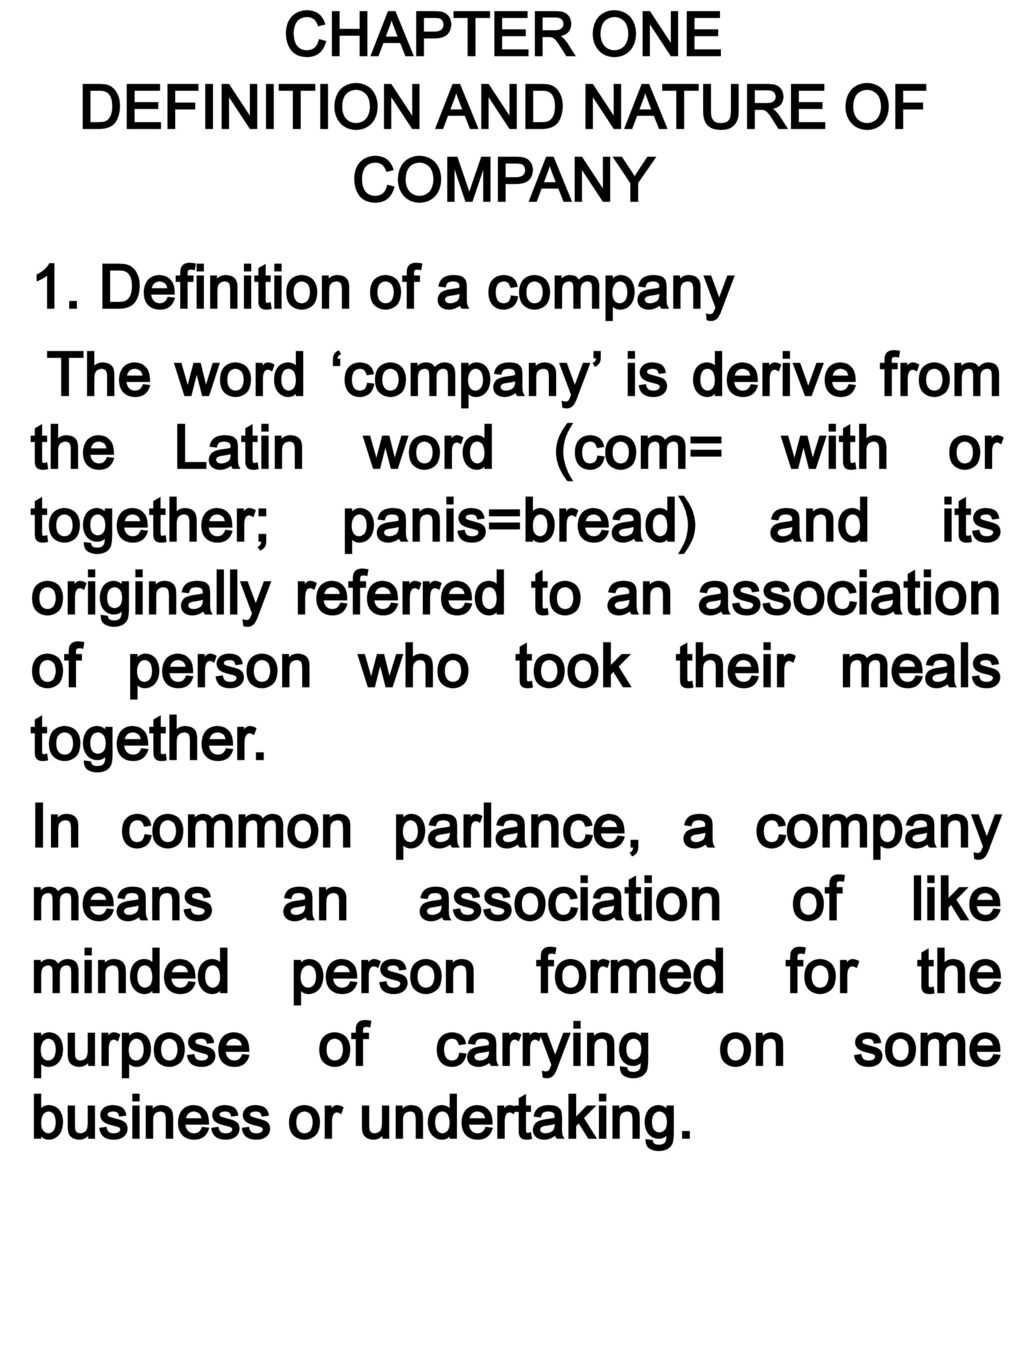 CHAPTER DEFINITION AND NATURE OF COMPANY - ppt download